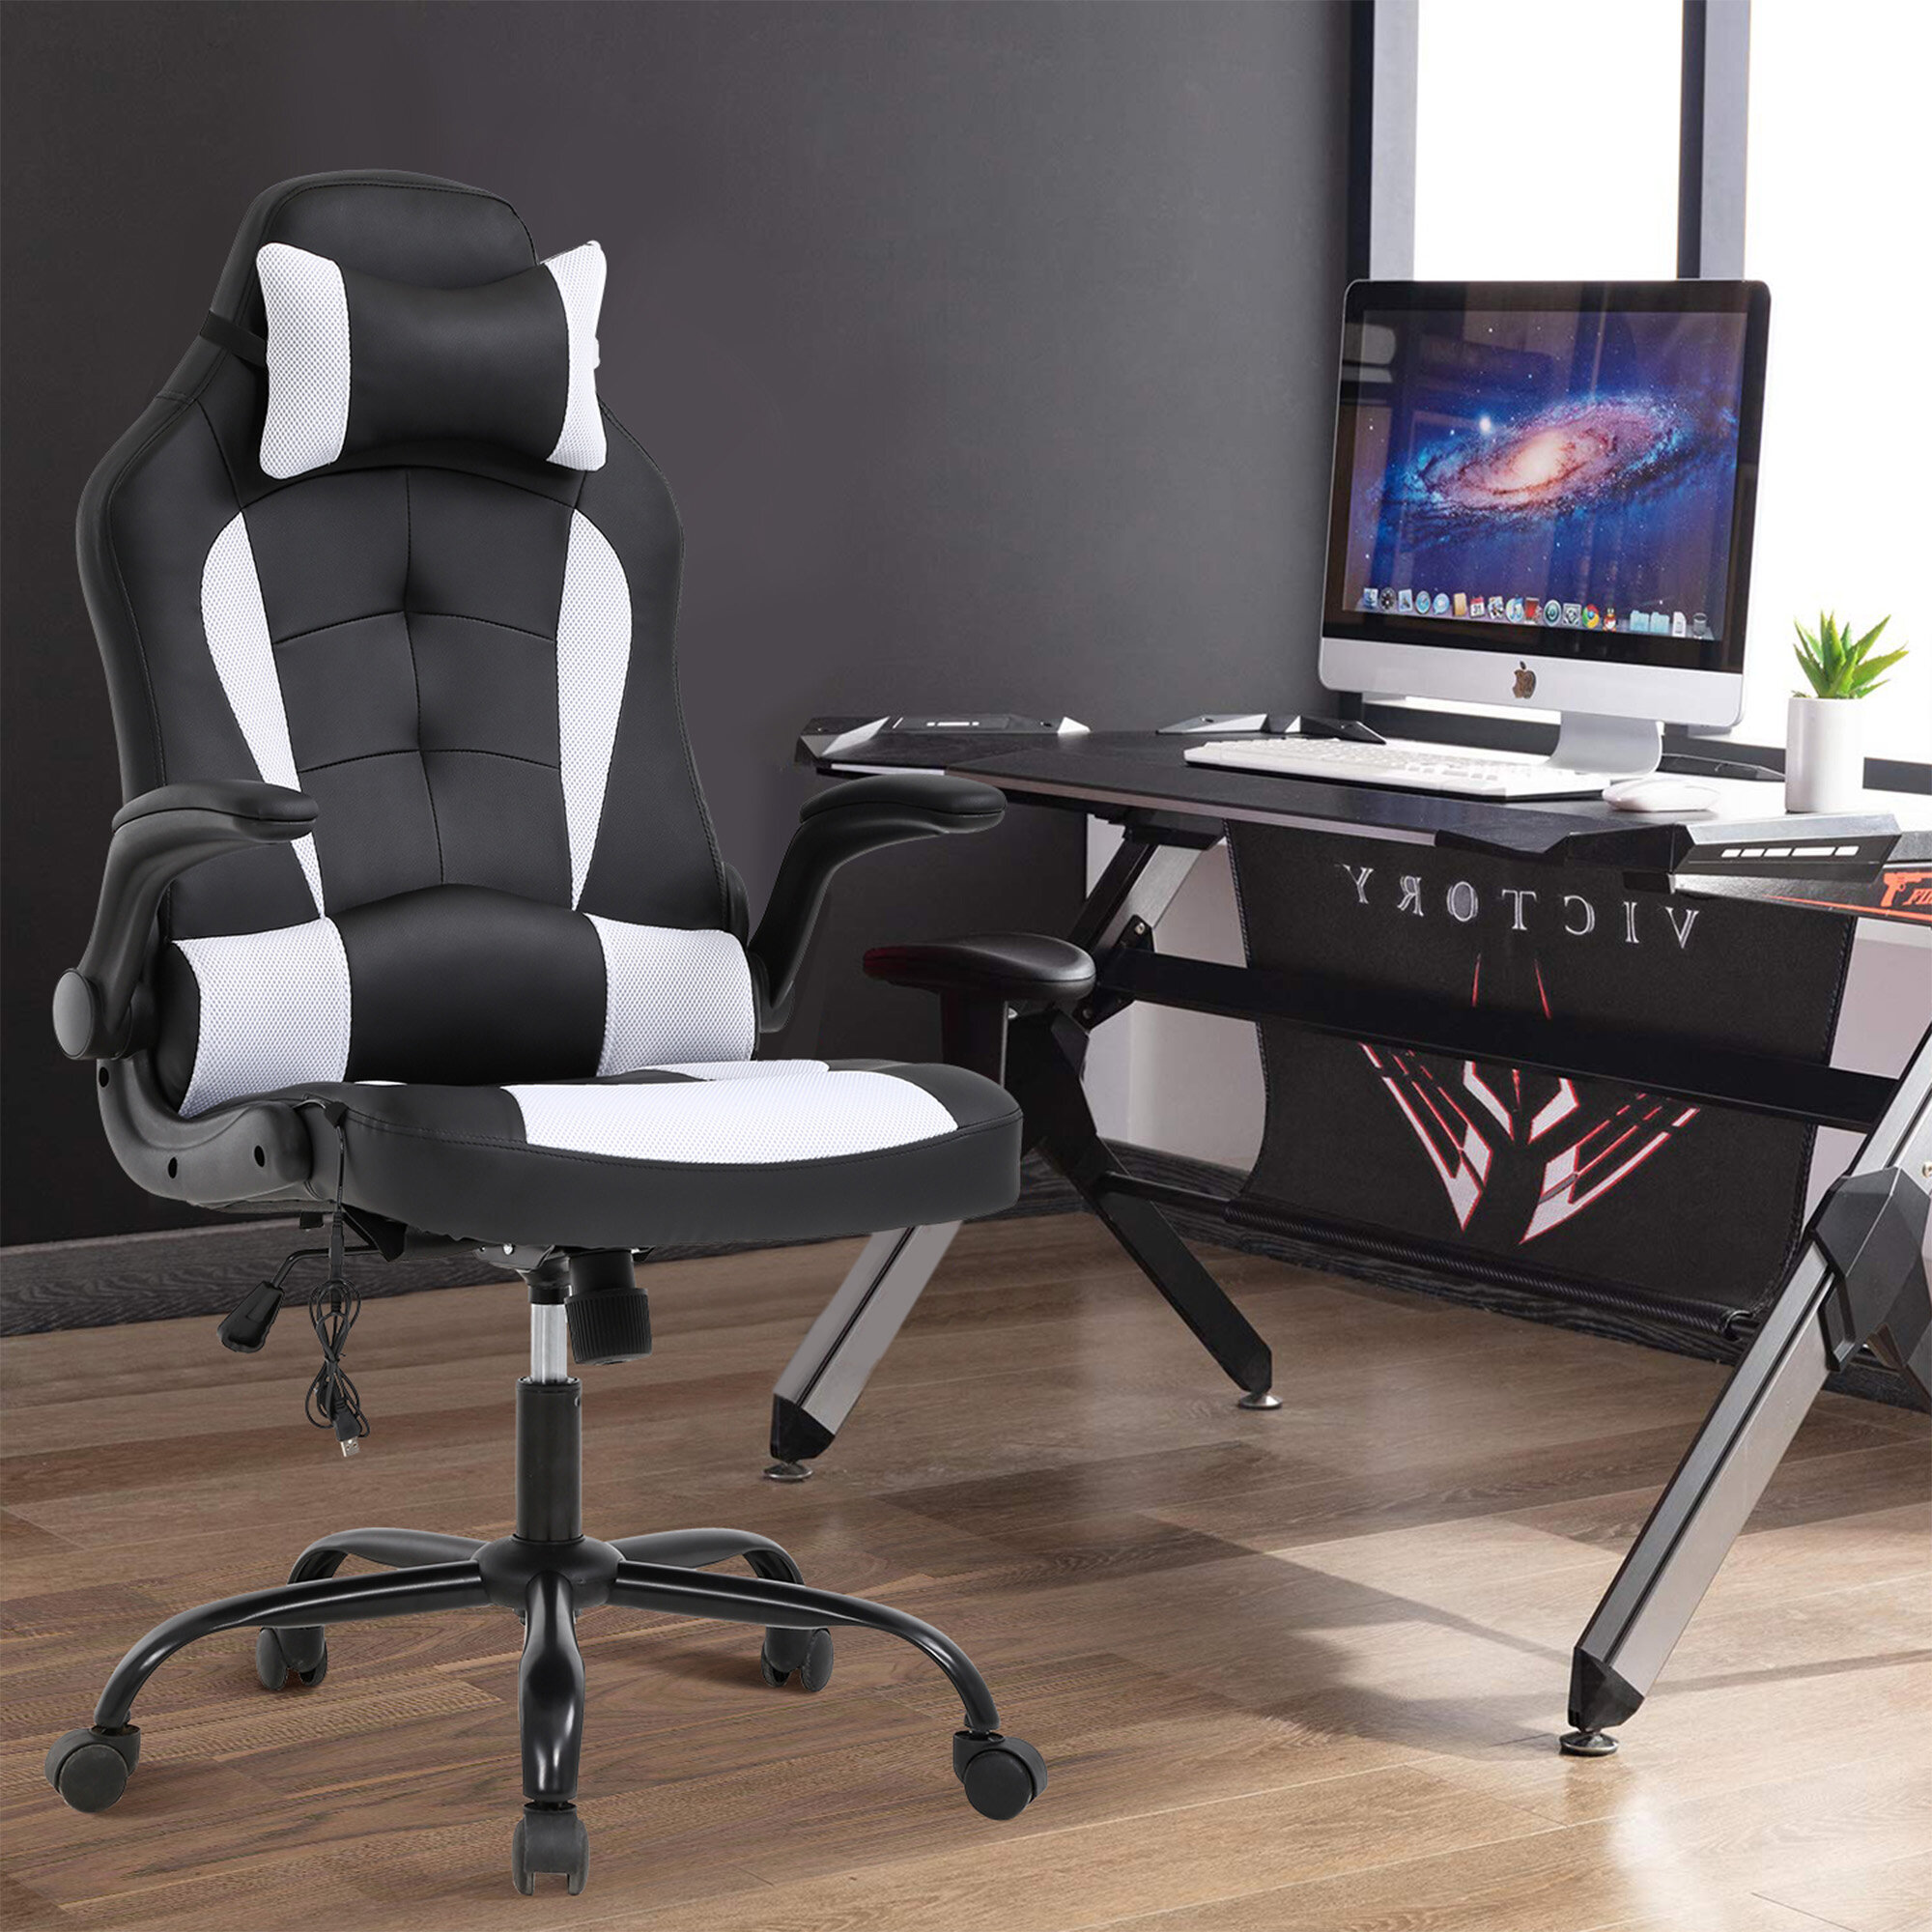 Racing Gaming Chair Ergonomic Design Leather Swivel Office Computer Desk Chair 